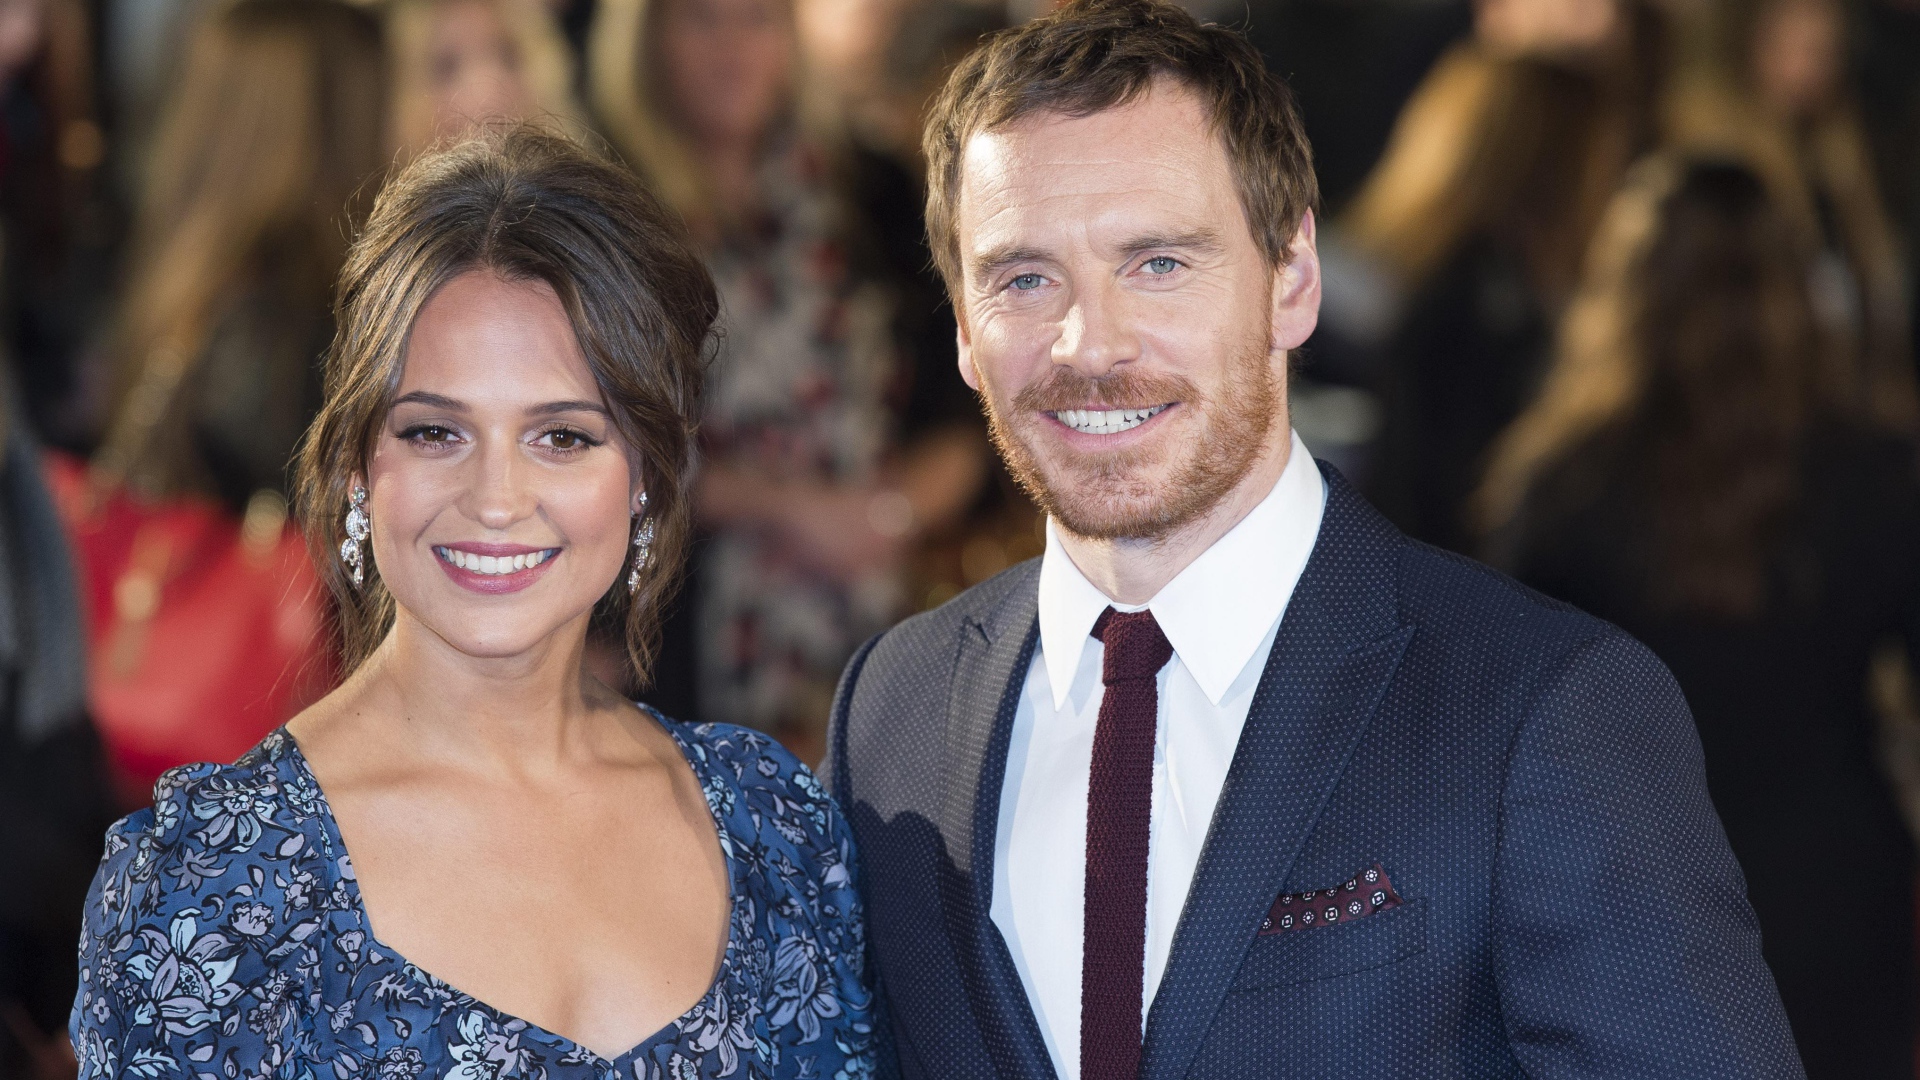 Smiling actors Alicia Wickander and Michael Fassbender